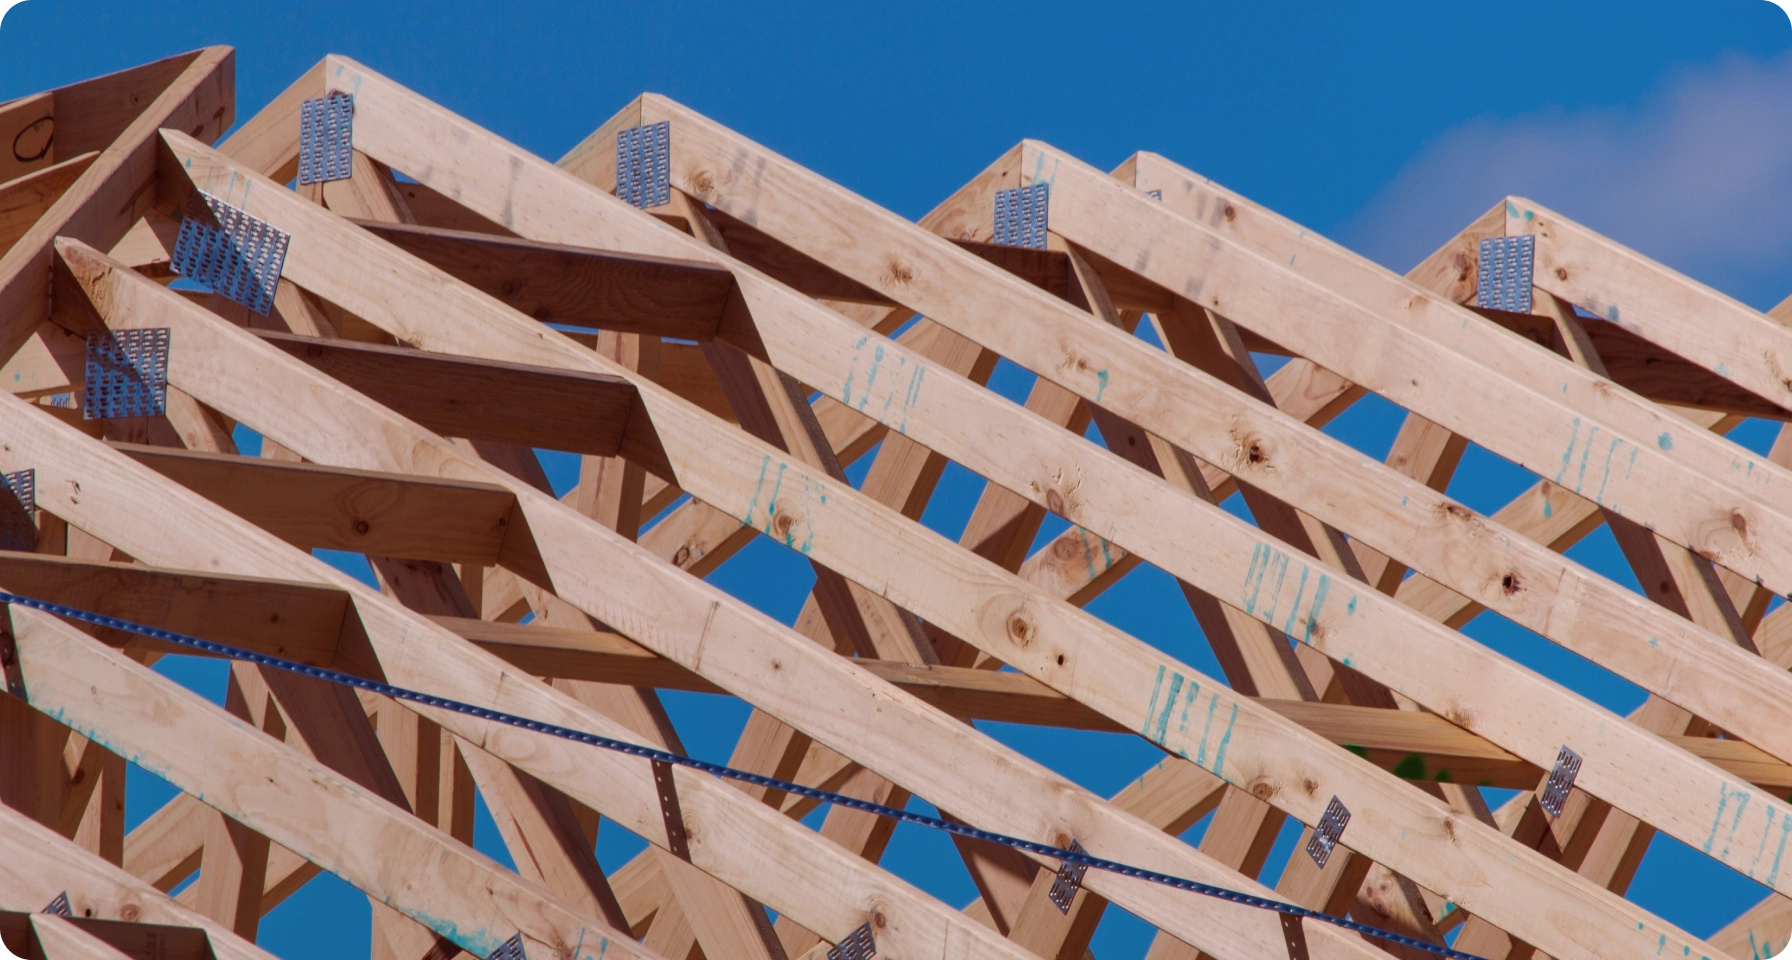 Roof truss in sunny weather conditions and blue sky.